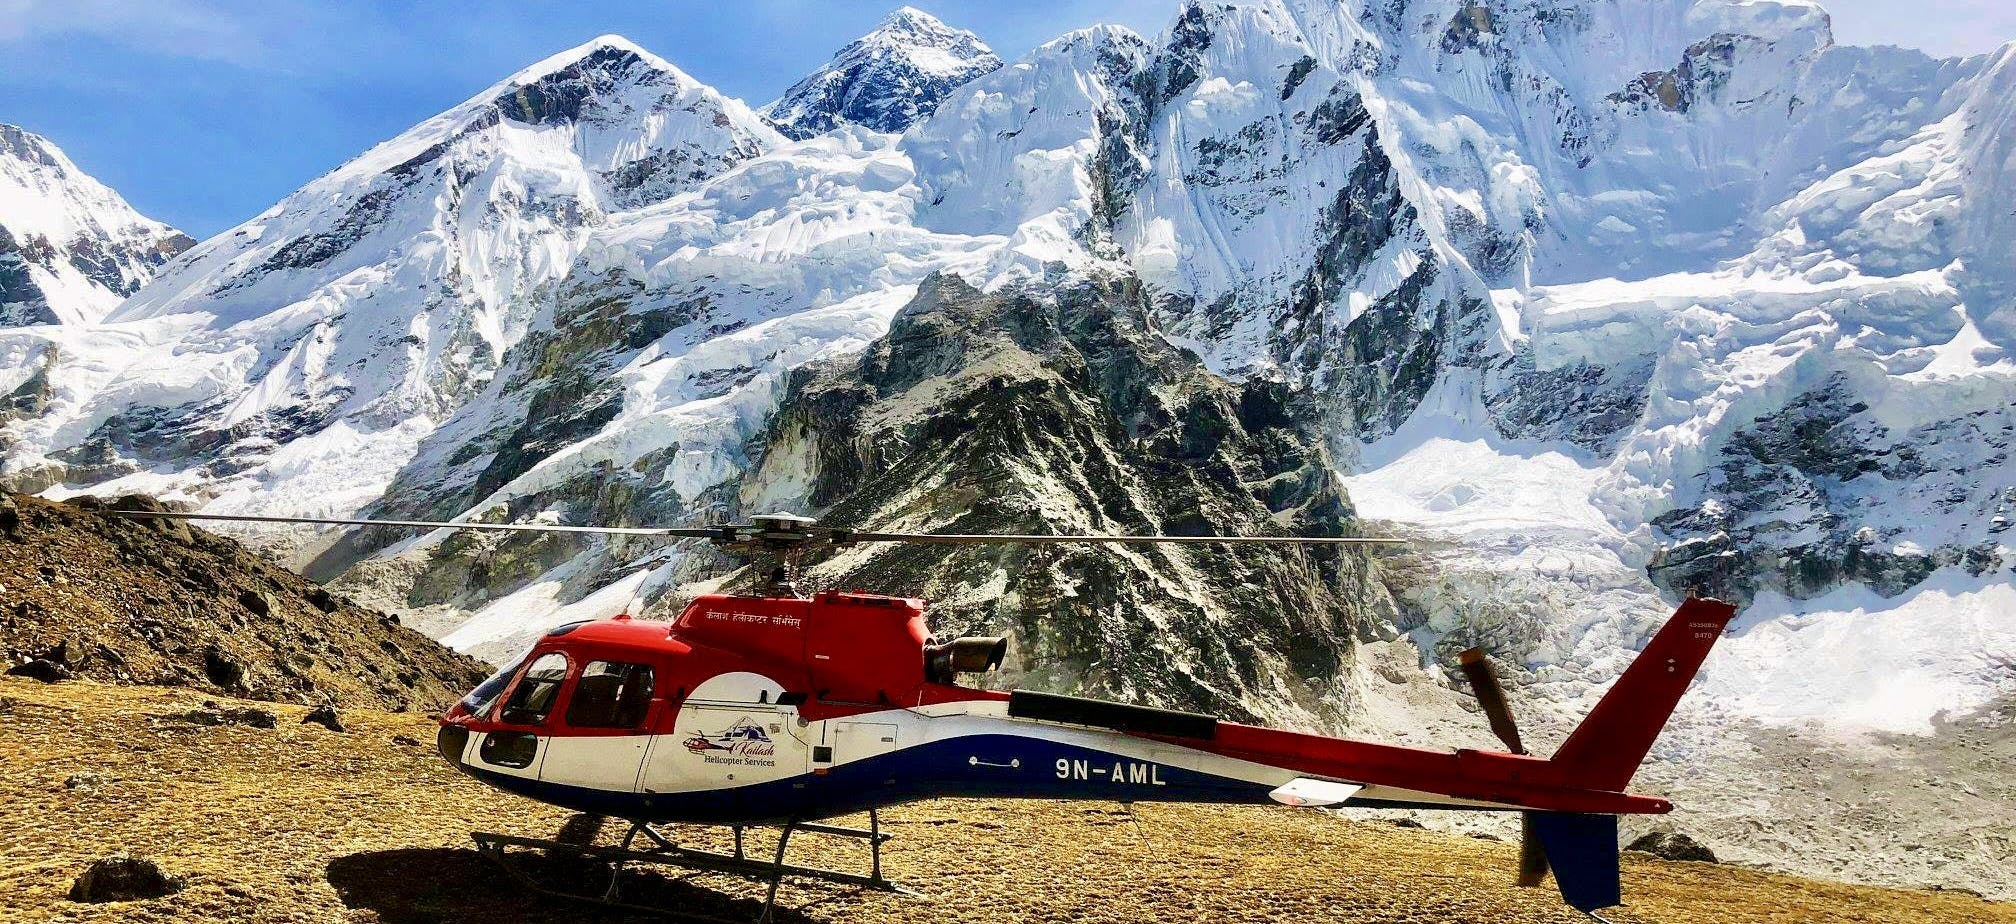 Equipment and Clothing for Everest Helicopter Tour